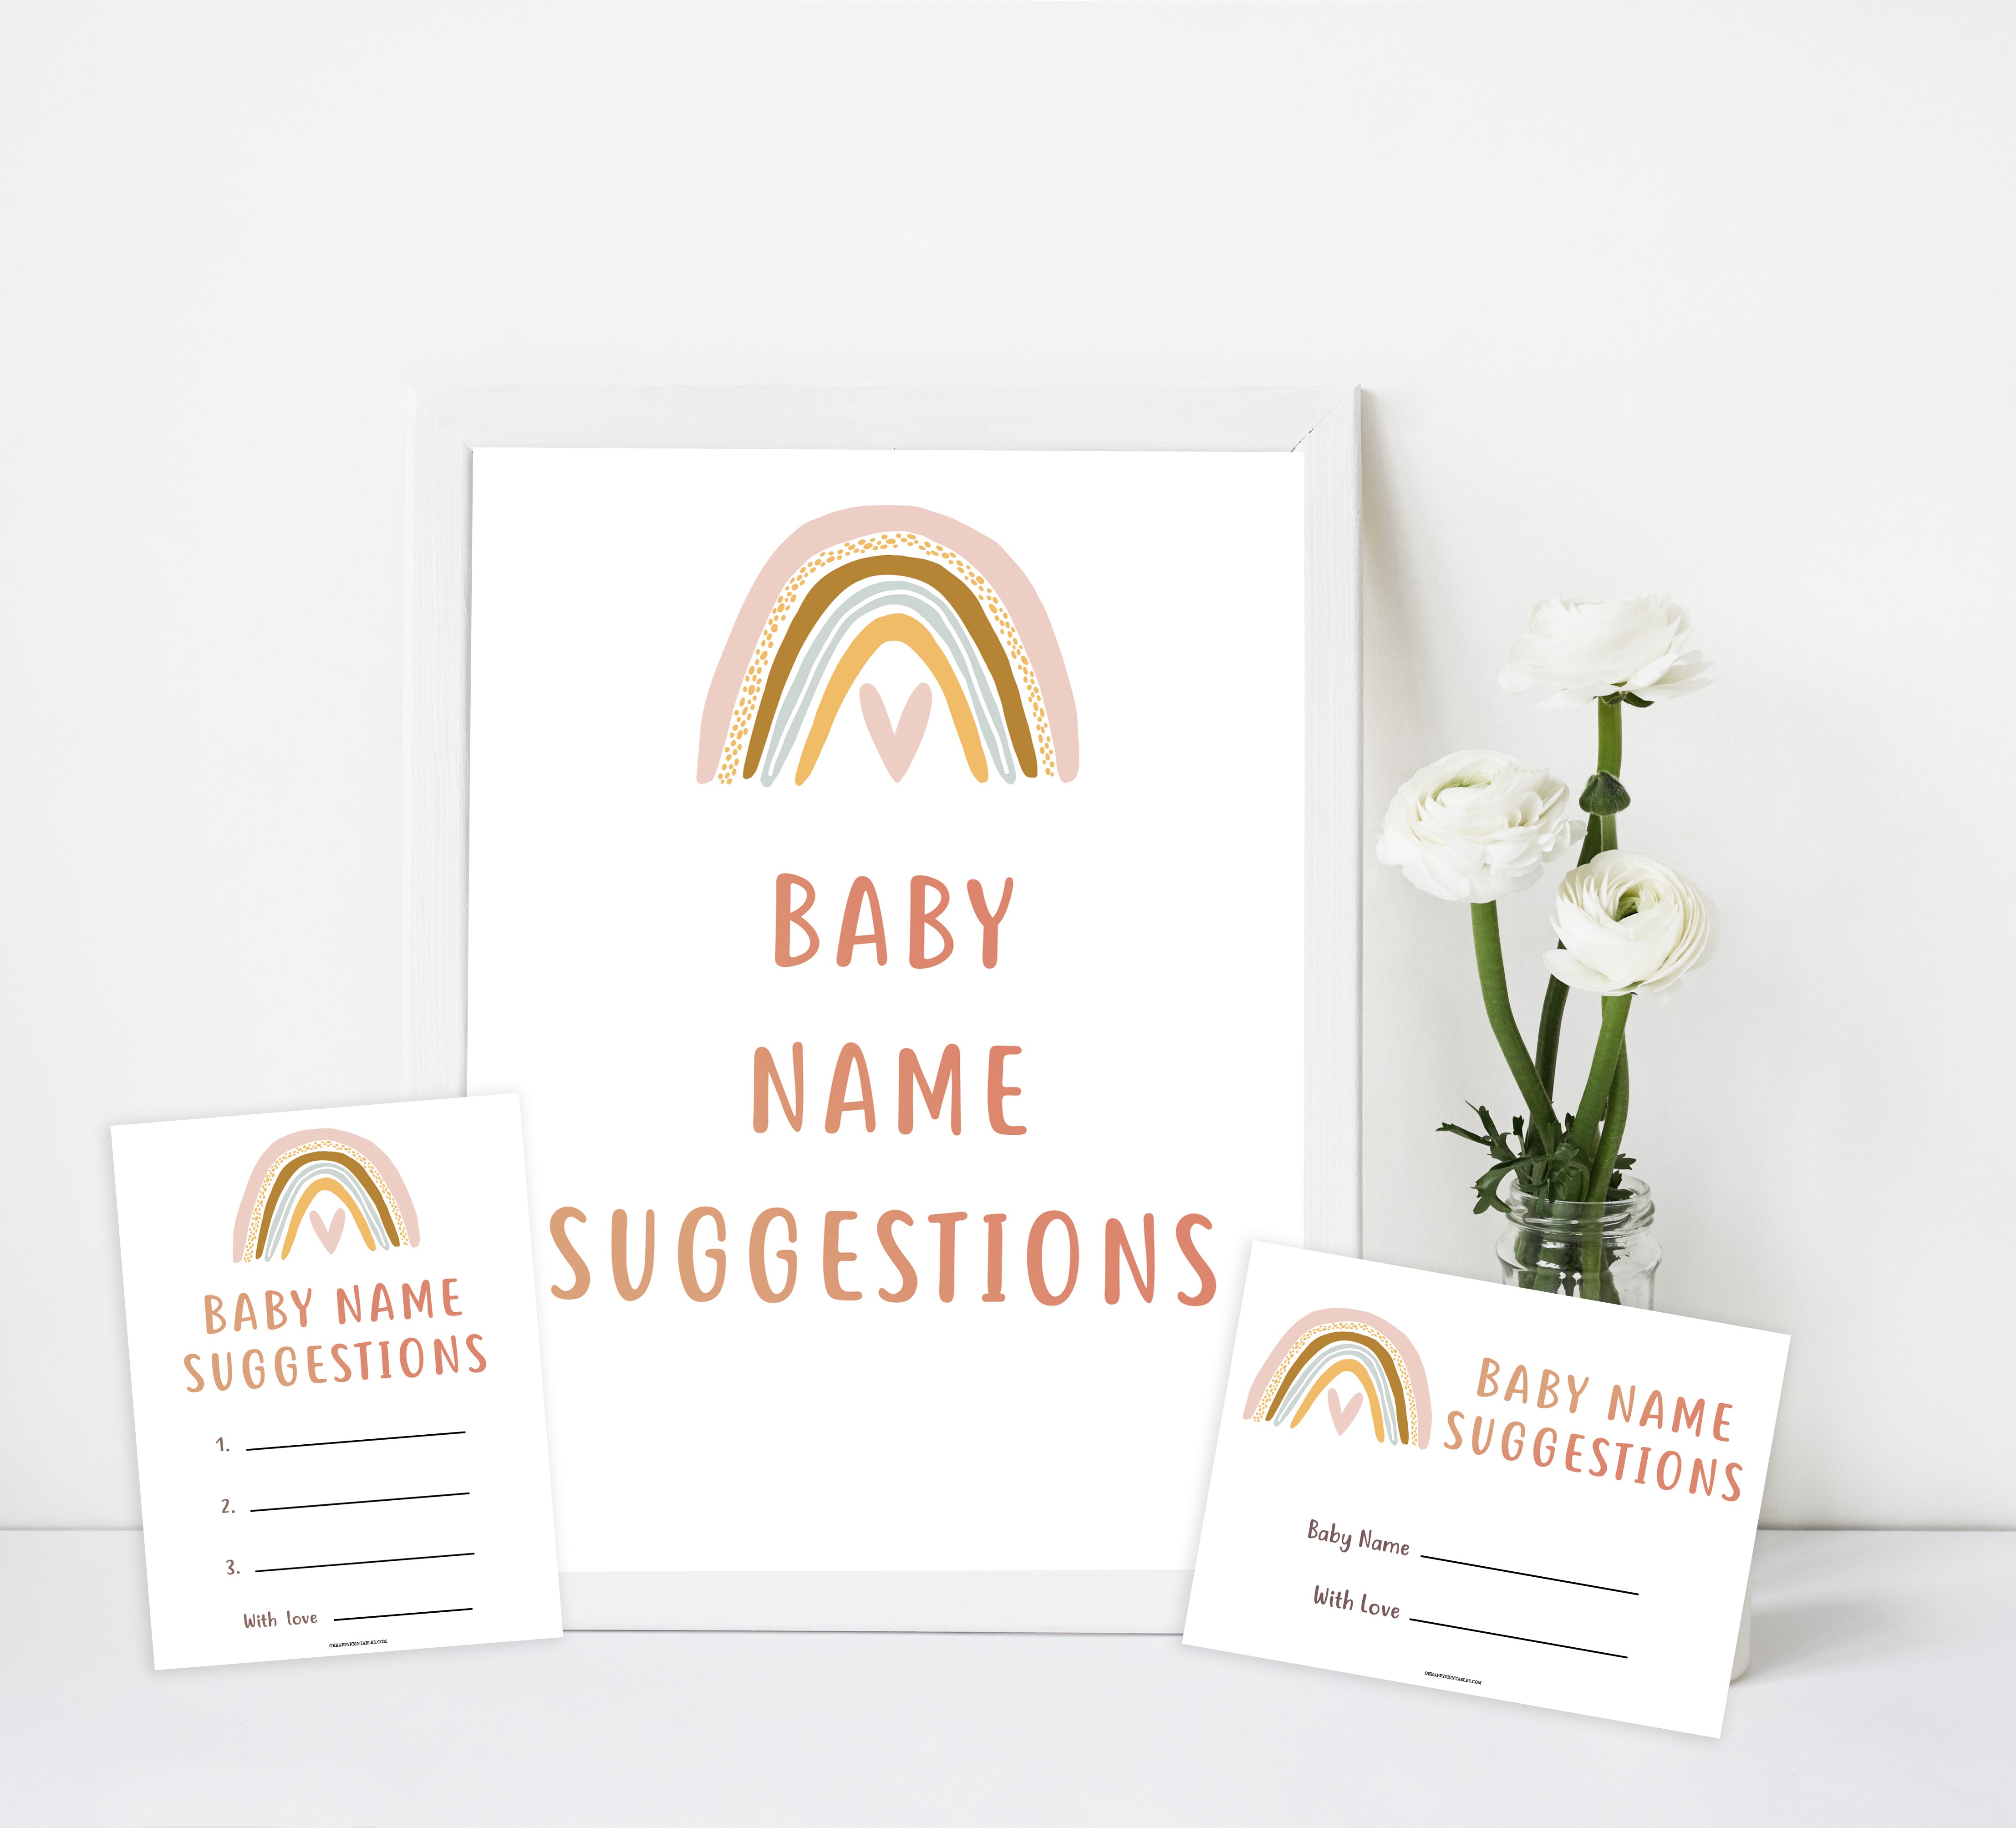 baby name suggestions game, Printable baby shower games, boho rainbow baby games, baby shower games, fun baby shower ideas, top baby shower ideas, boho rainbow baby shower, baby shower games, fun boho rainbow baby shower ideas